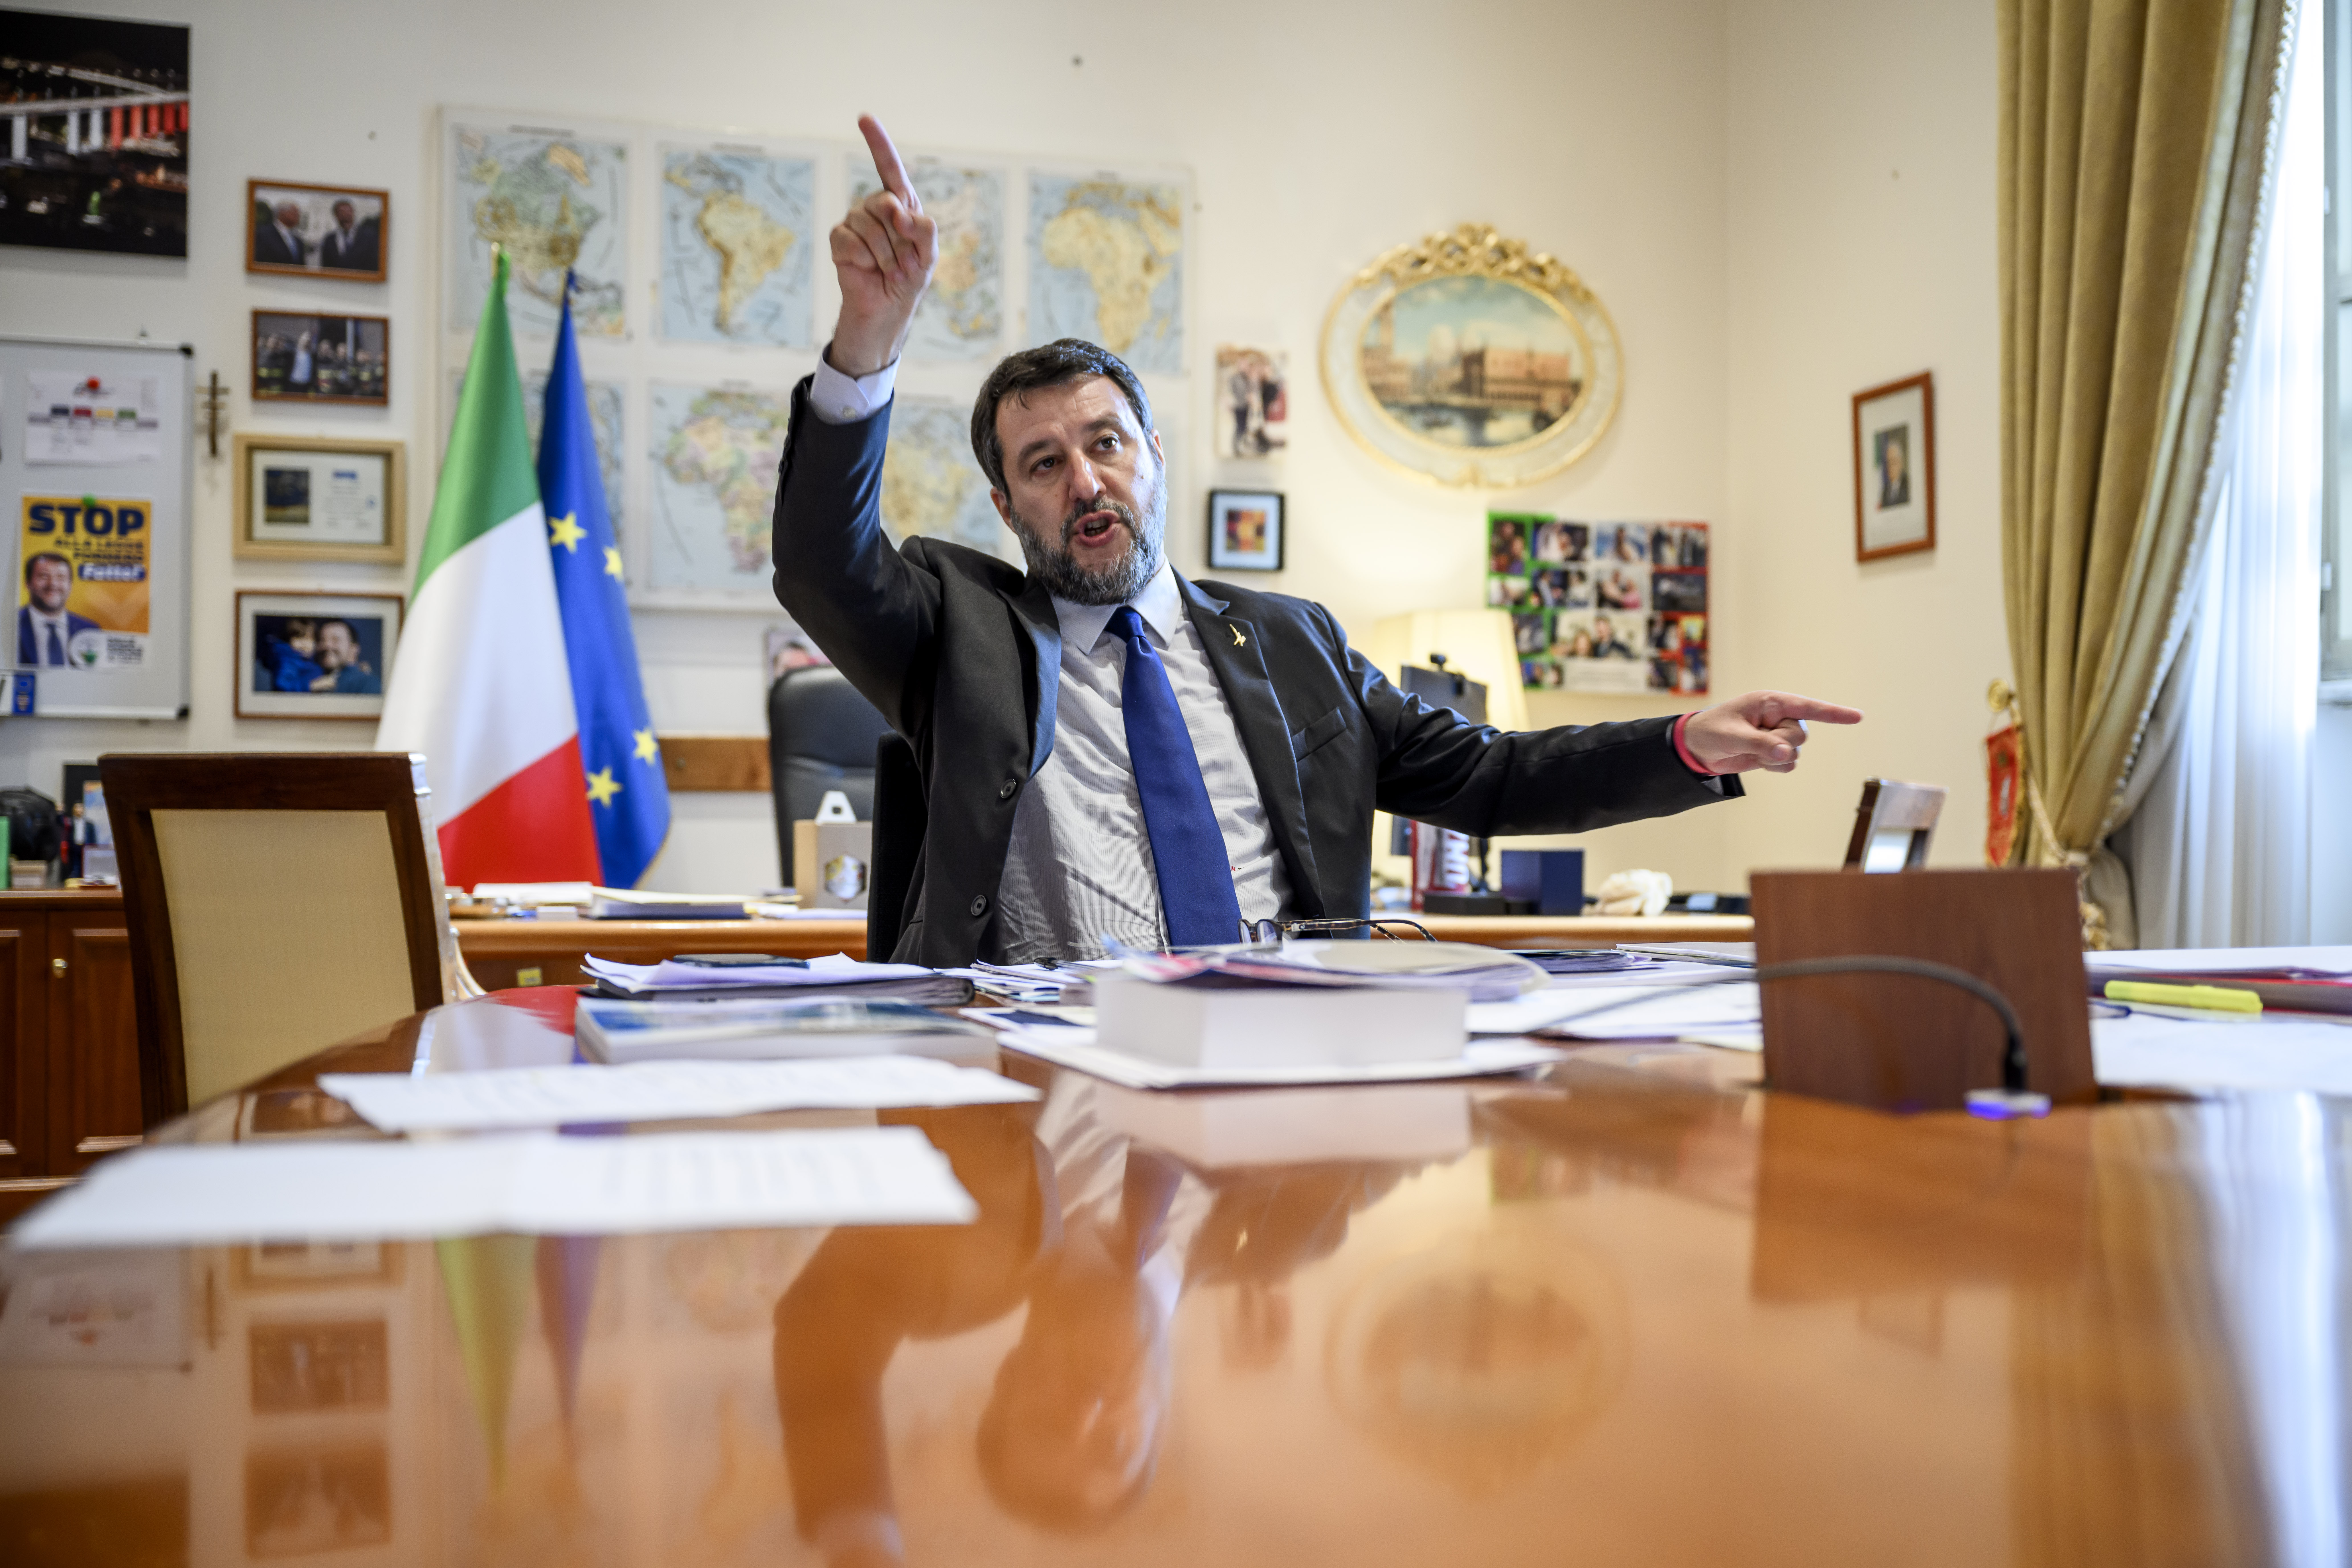 Le Pen flaunts her political closeness with Salvini on Italy visit